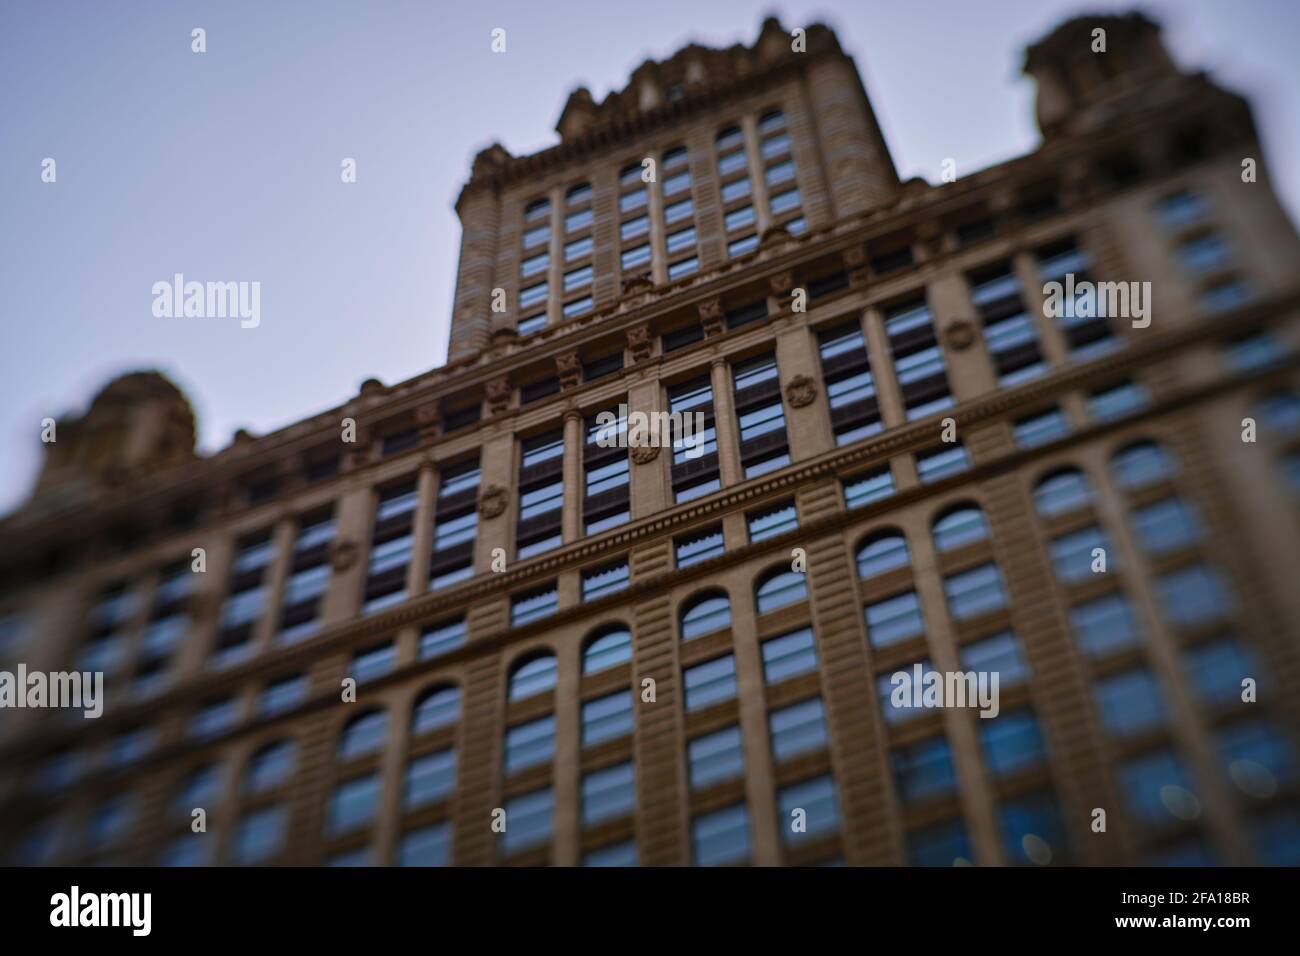 Lensbaby photograph of Chicago architecture Stock Photo